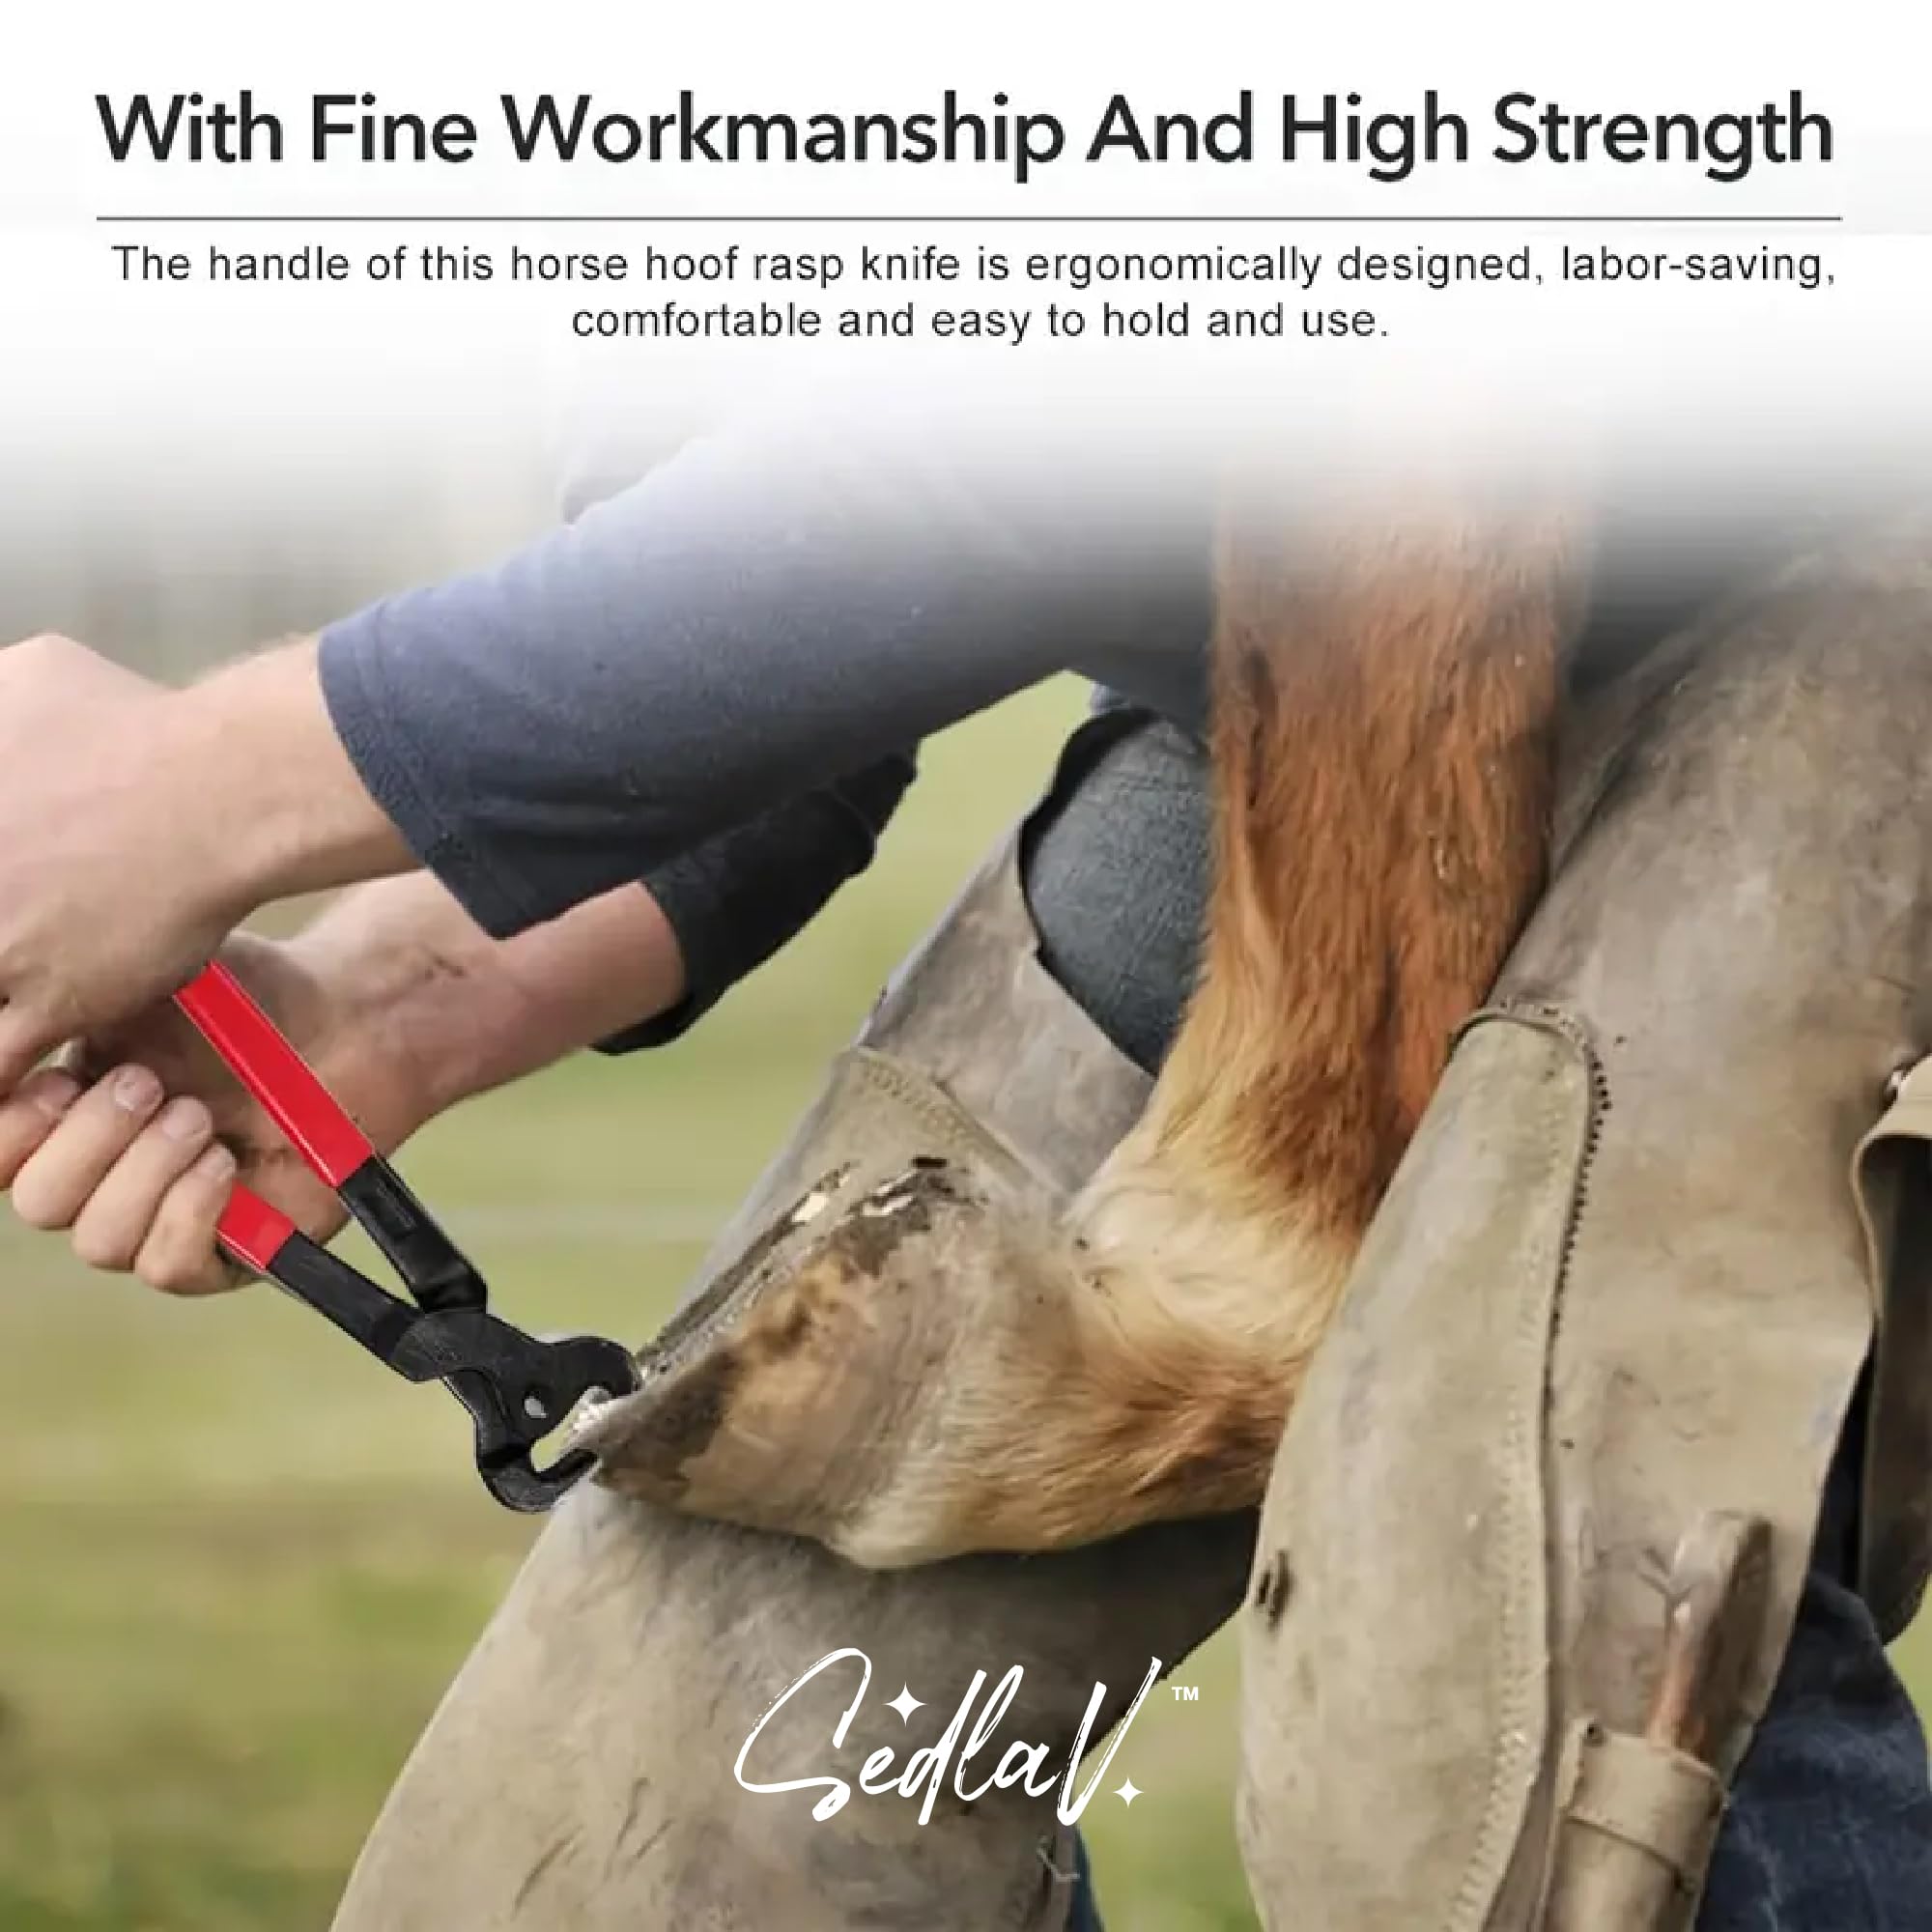 SEDLAV Horse Farrier Hoof Trim Tool Kit Metal, Ergonomically Designed Handle, Suitable for Manicuring & Cleaning Horseshoes - Includes Horseshoe File, Hoof Cutter & Knife